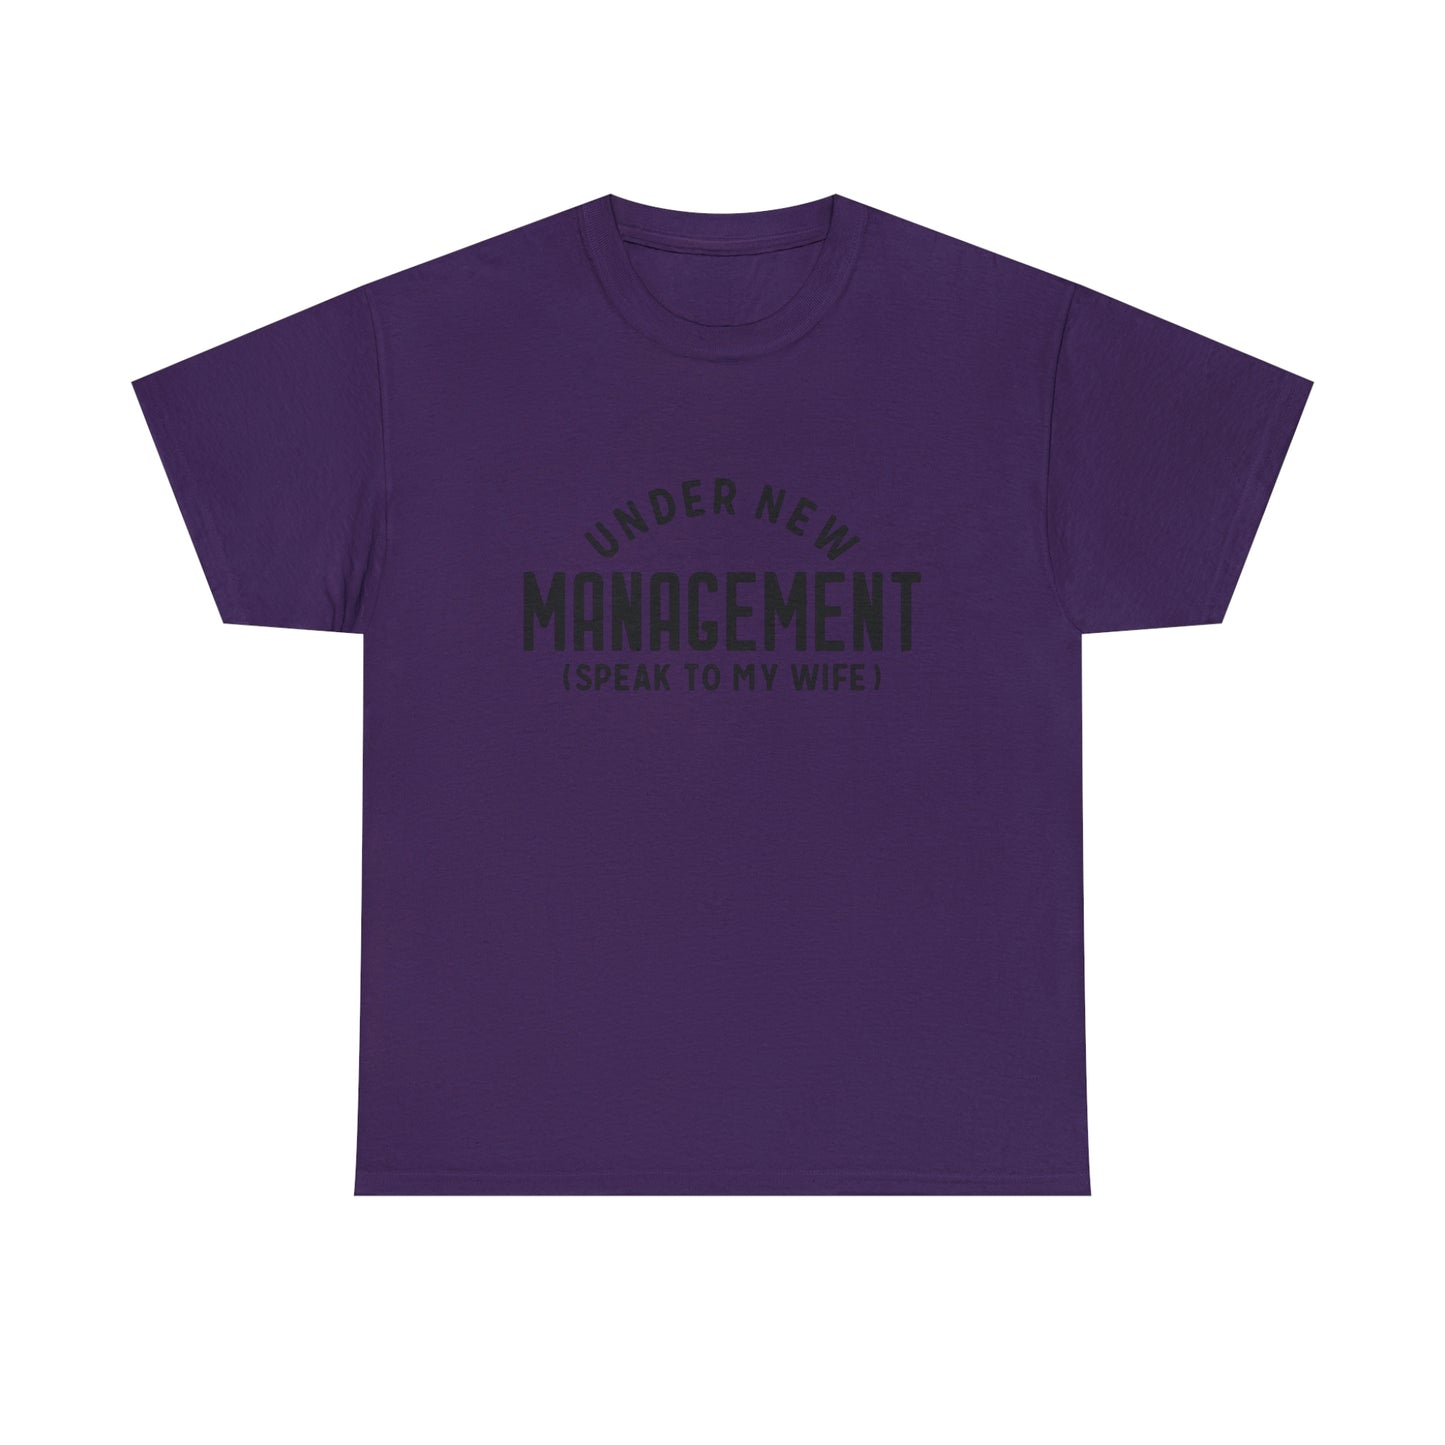 Male Apparel (New Management/Tee)